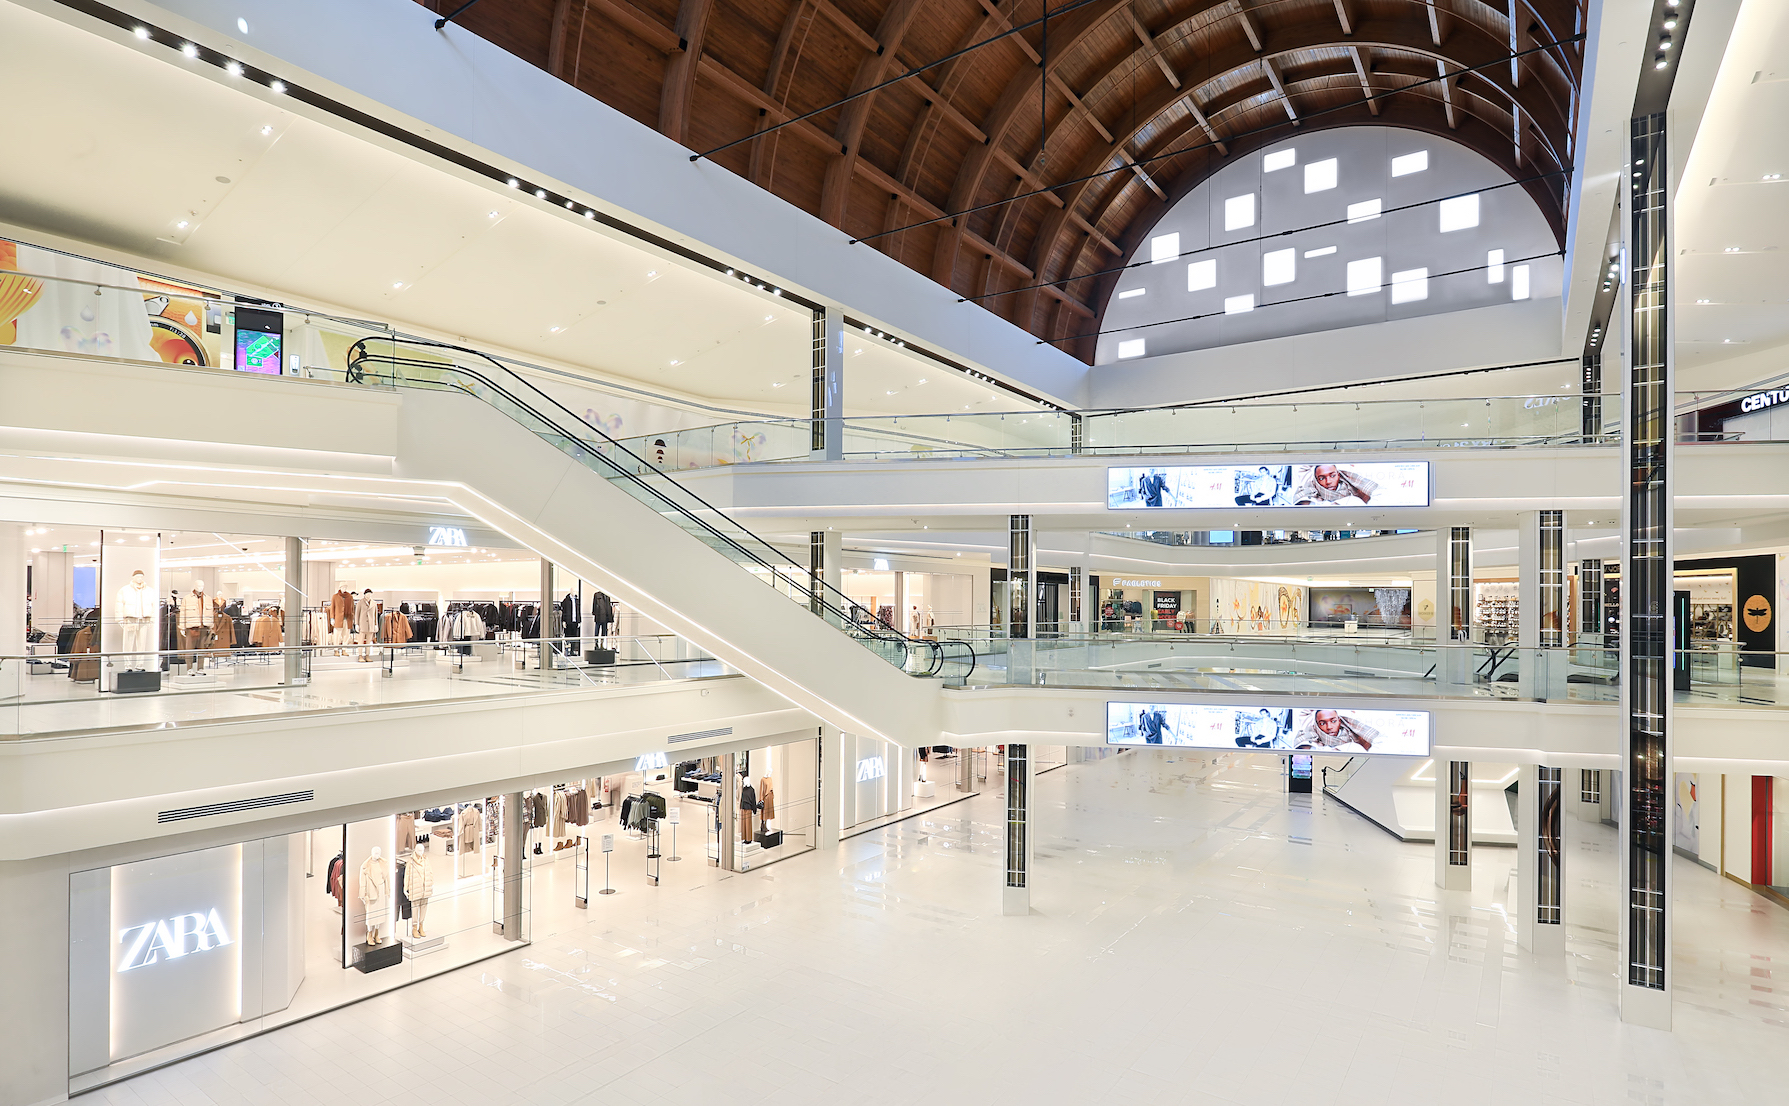 The long-delayed American Dream retail/entertainment center in East Rutherford, N.J., was finished in December 2020, in the middle of the pandemic. Photo: Chris Lo Bue Photography